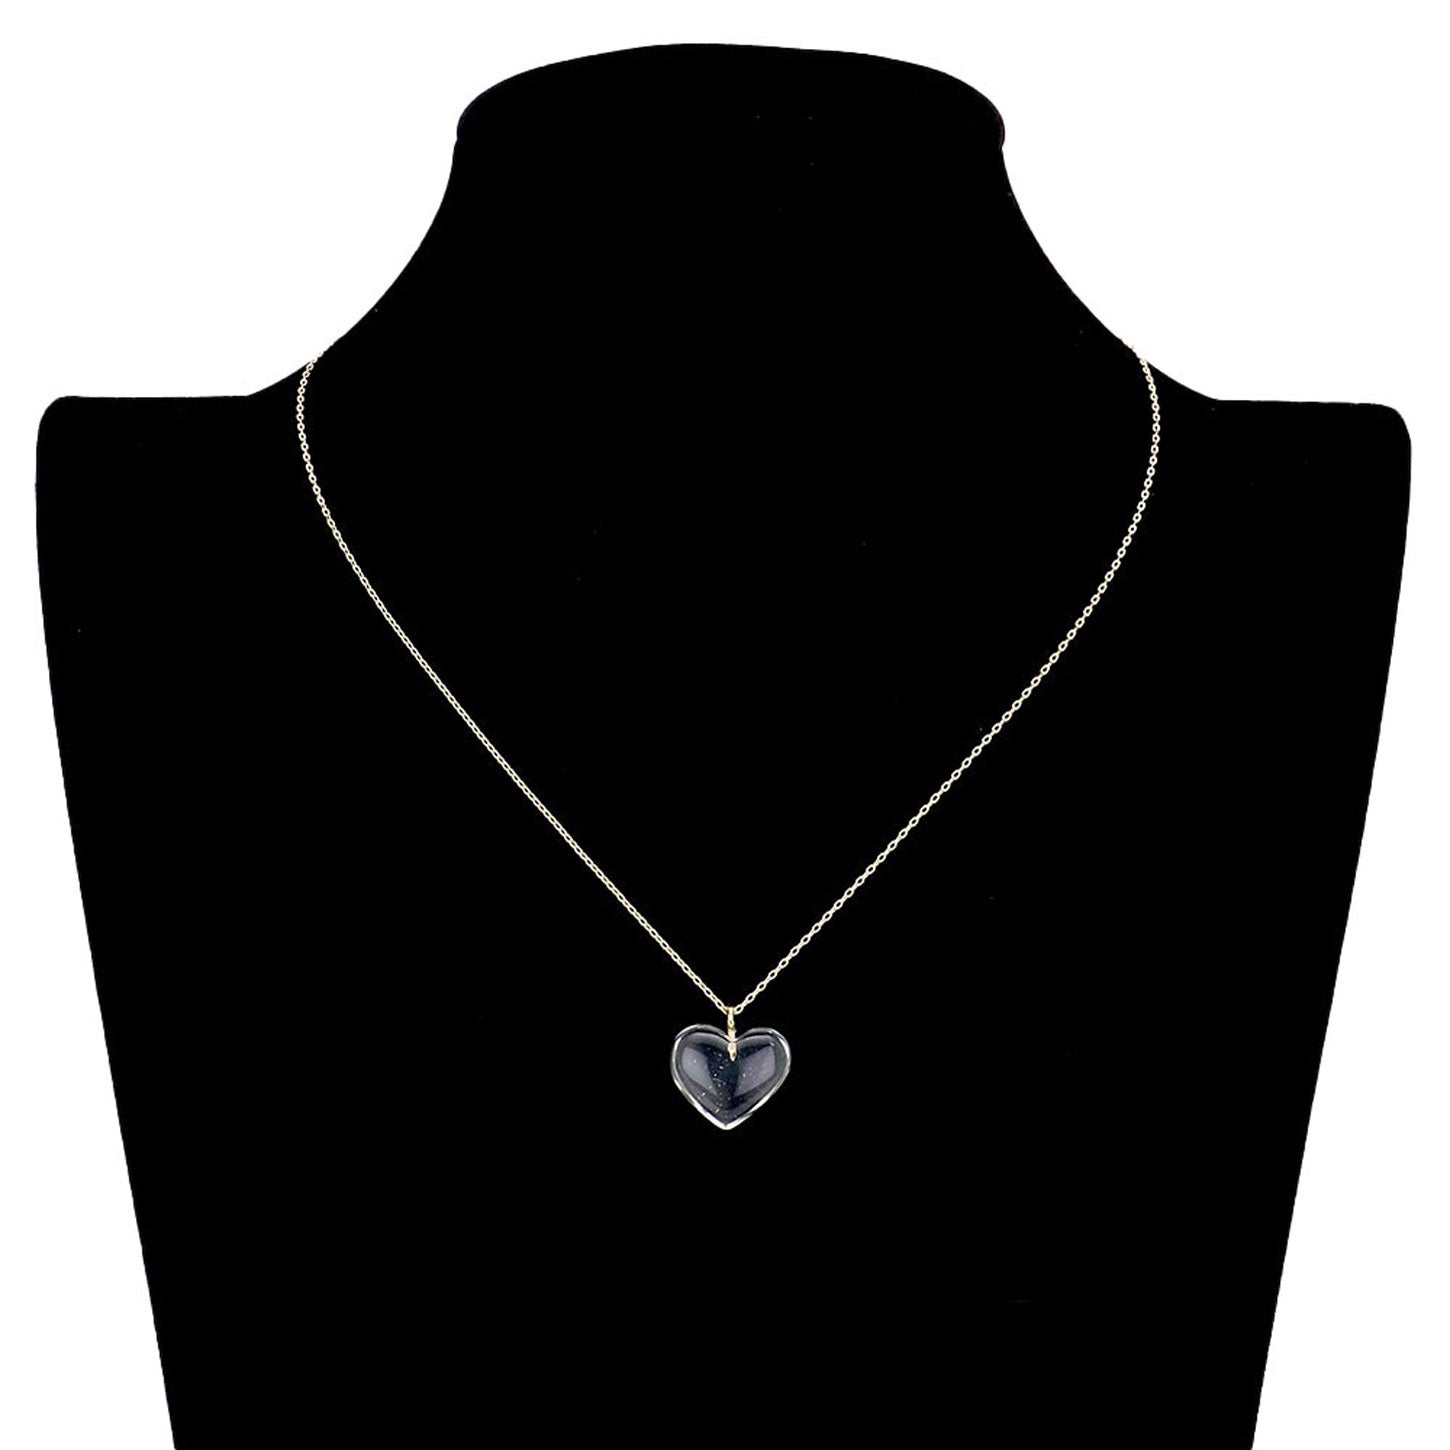 Clear Brass Metal Lucite Heart Pendant Necklace, Get ready with these Lucite Heart Pendant Necklace, put on a pop of color to complete your ensemble. Perfect for adding just the right amount of shimmer & shine and a touch of class to special events. Perfect Birthday Gift, Anniversary Gift, Mother's Day Gift, Graduation Gift